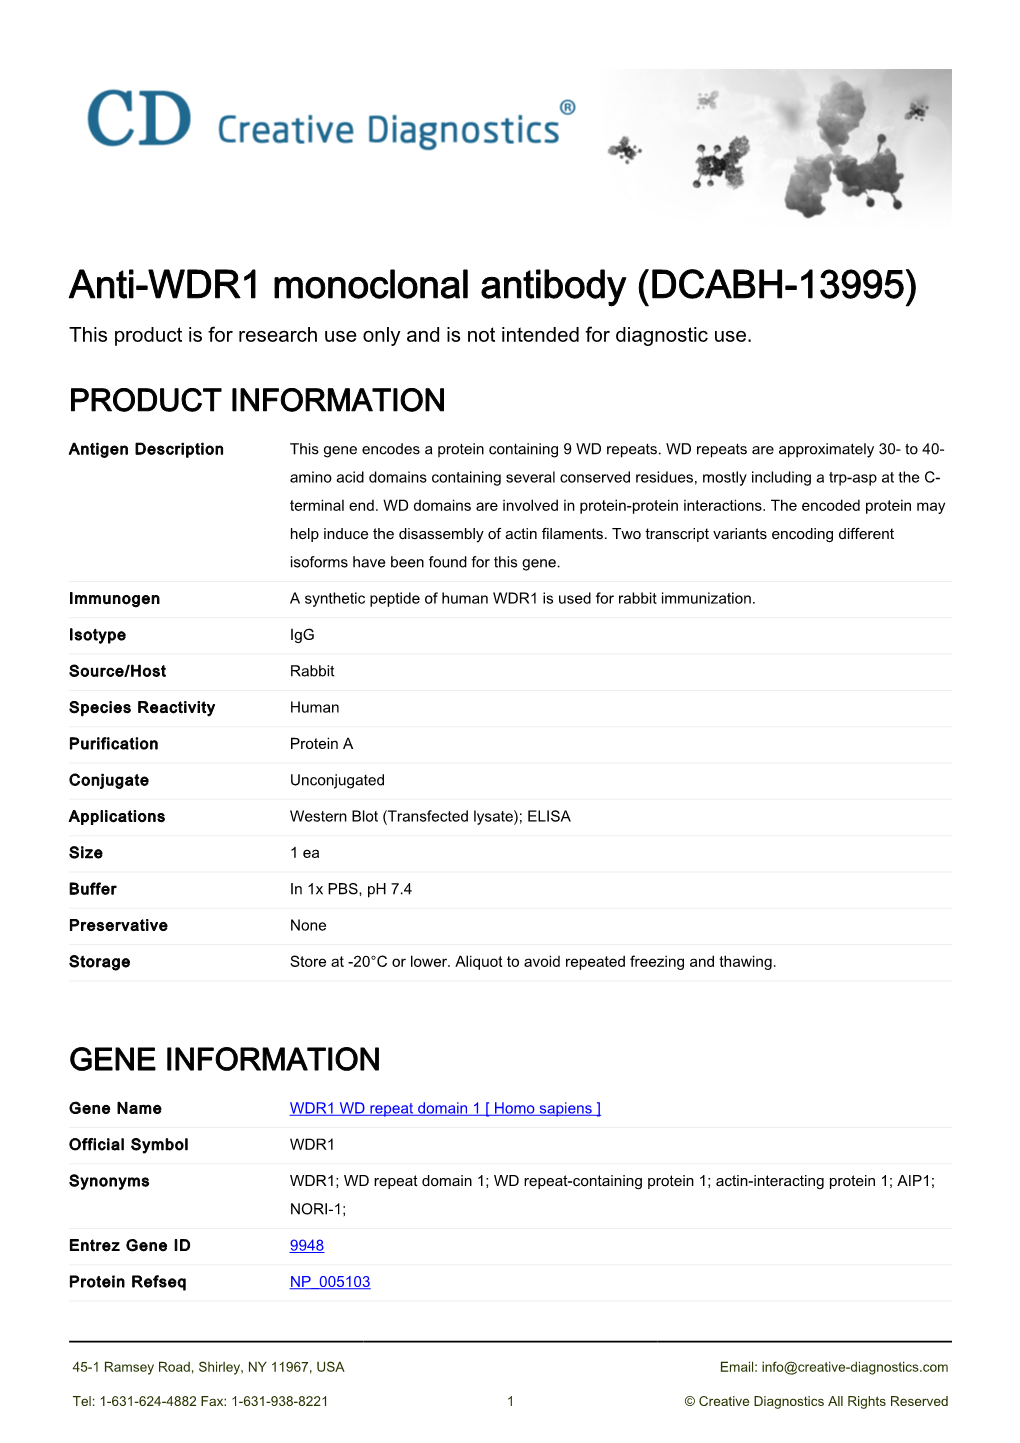 Anti-WDR1 Monoclonal Antibody (DCABH-13995) This Product Is for Research Use Only and Is Not Intended for Diagnostic Use